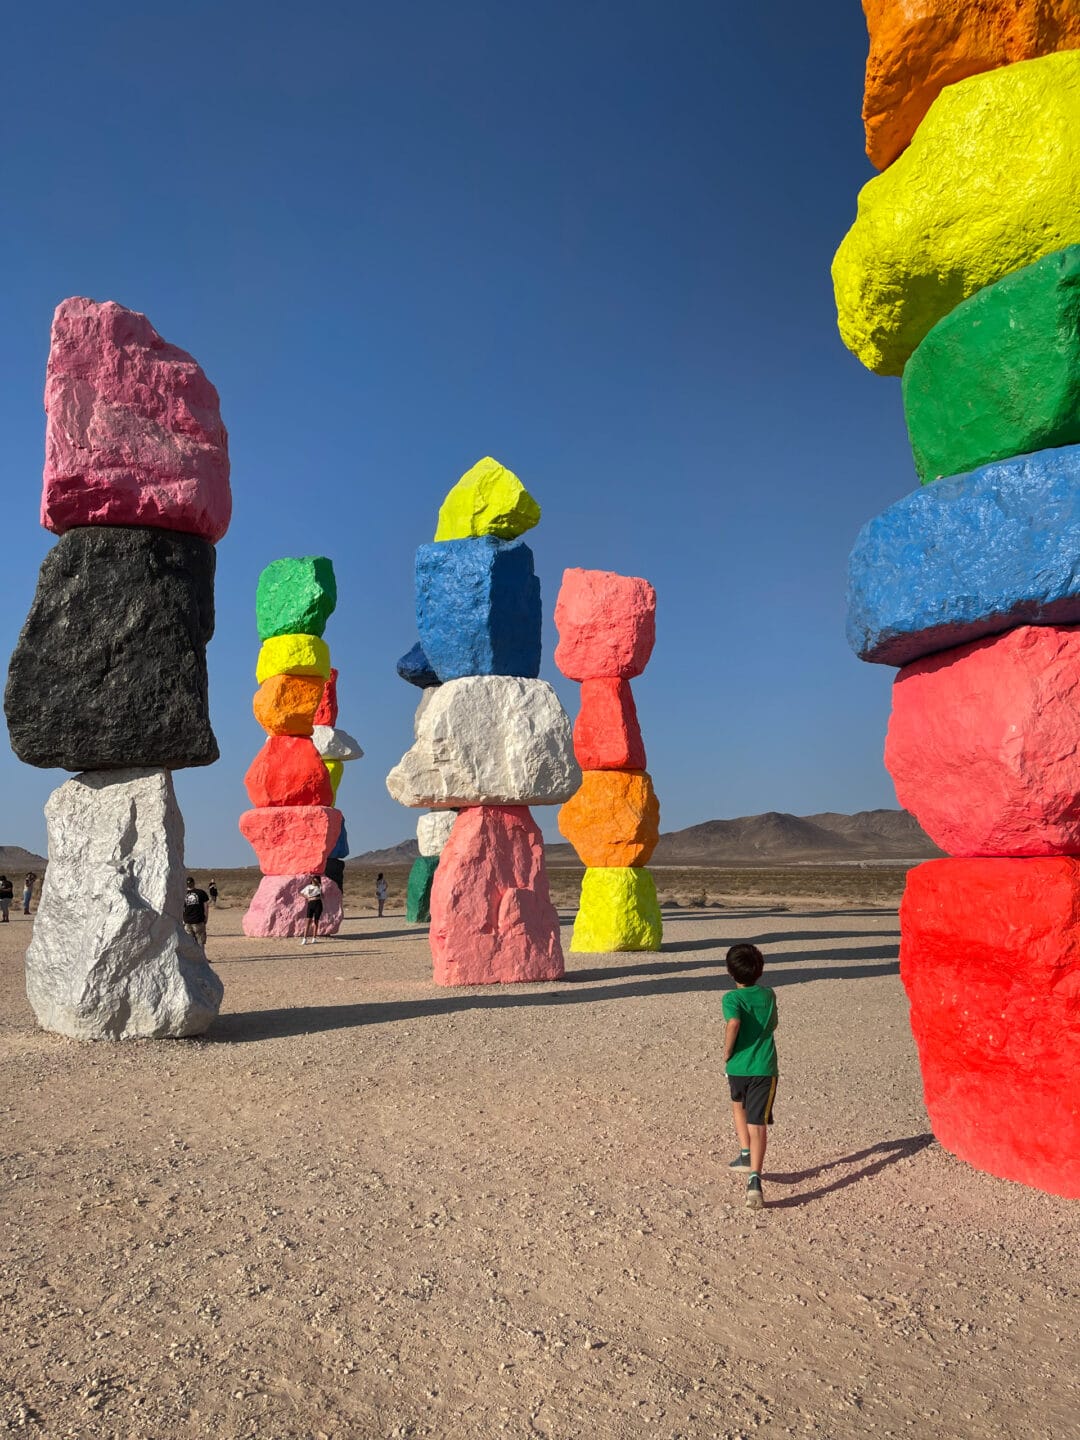 stacks of rocks painted neon colors in the desert against a blue sky